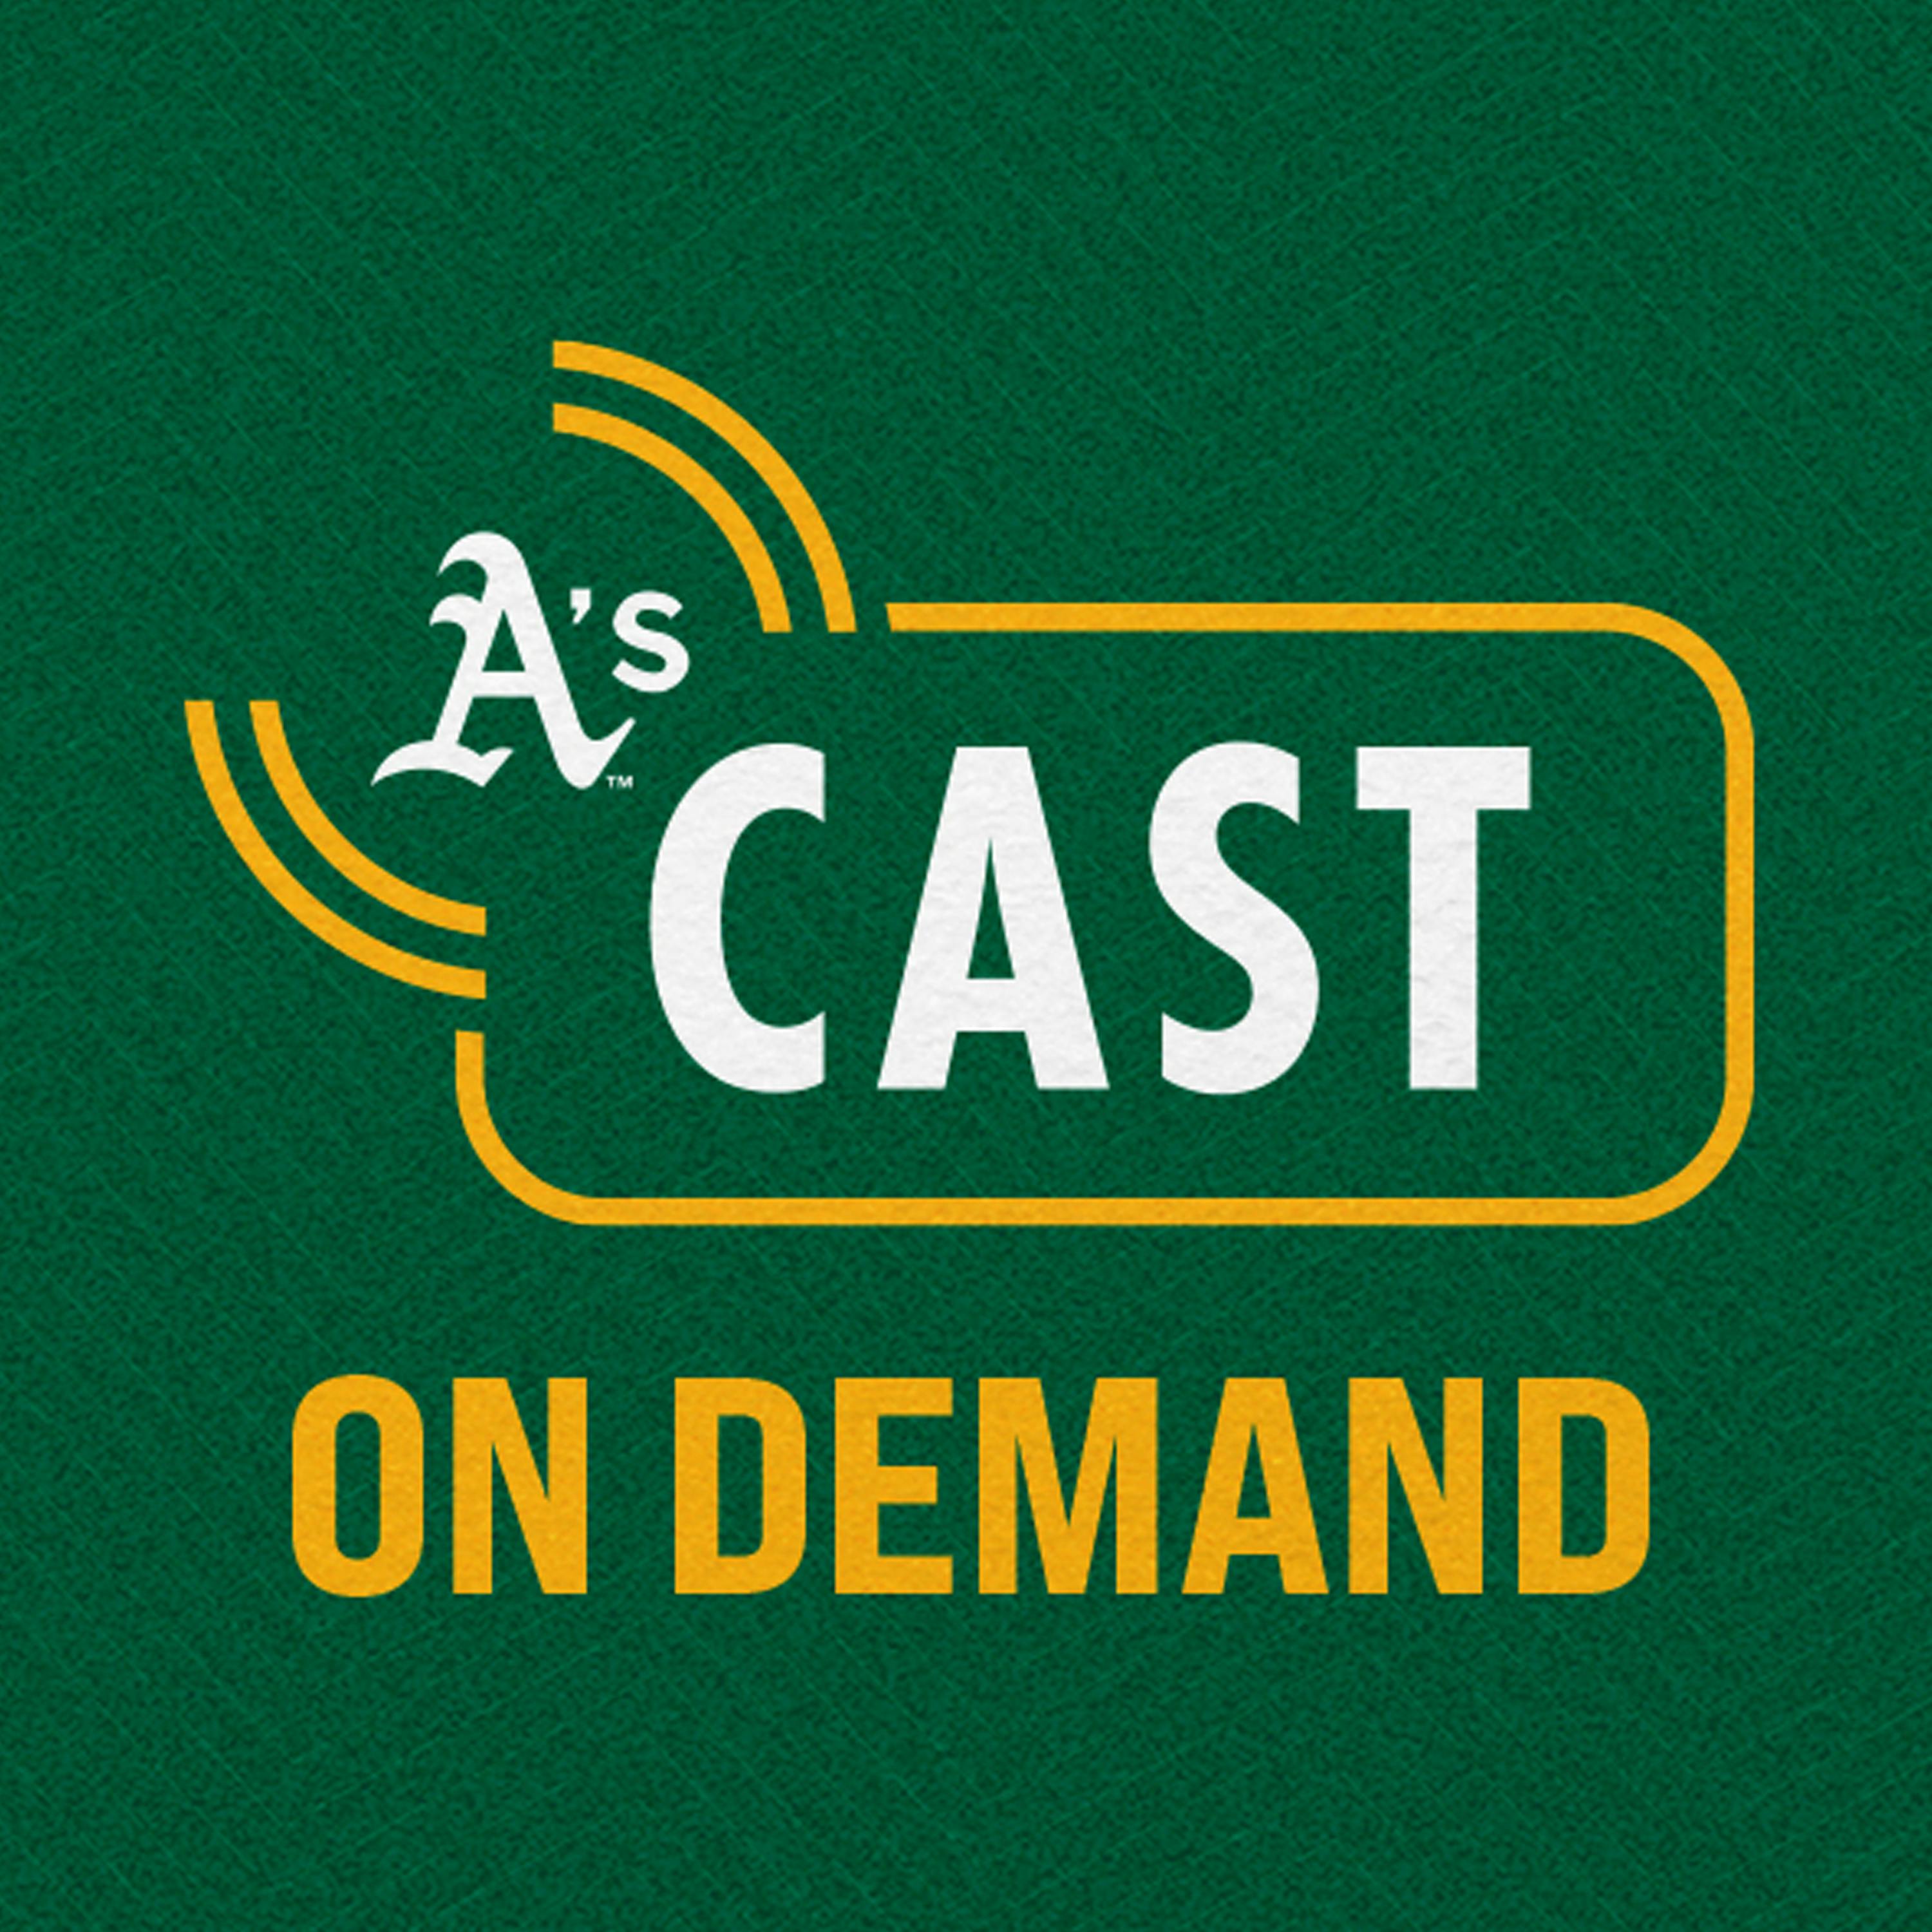 A's Cast - A's Cast Live - May 13